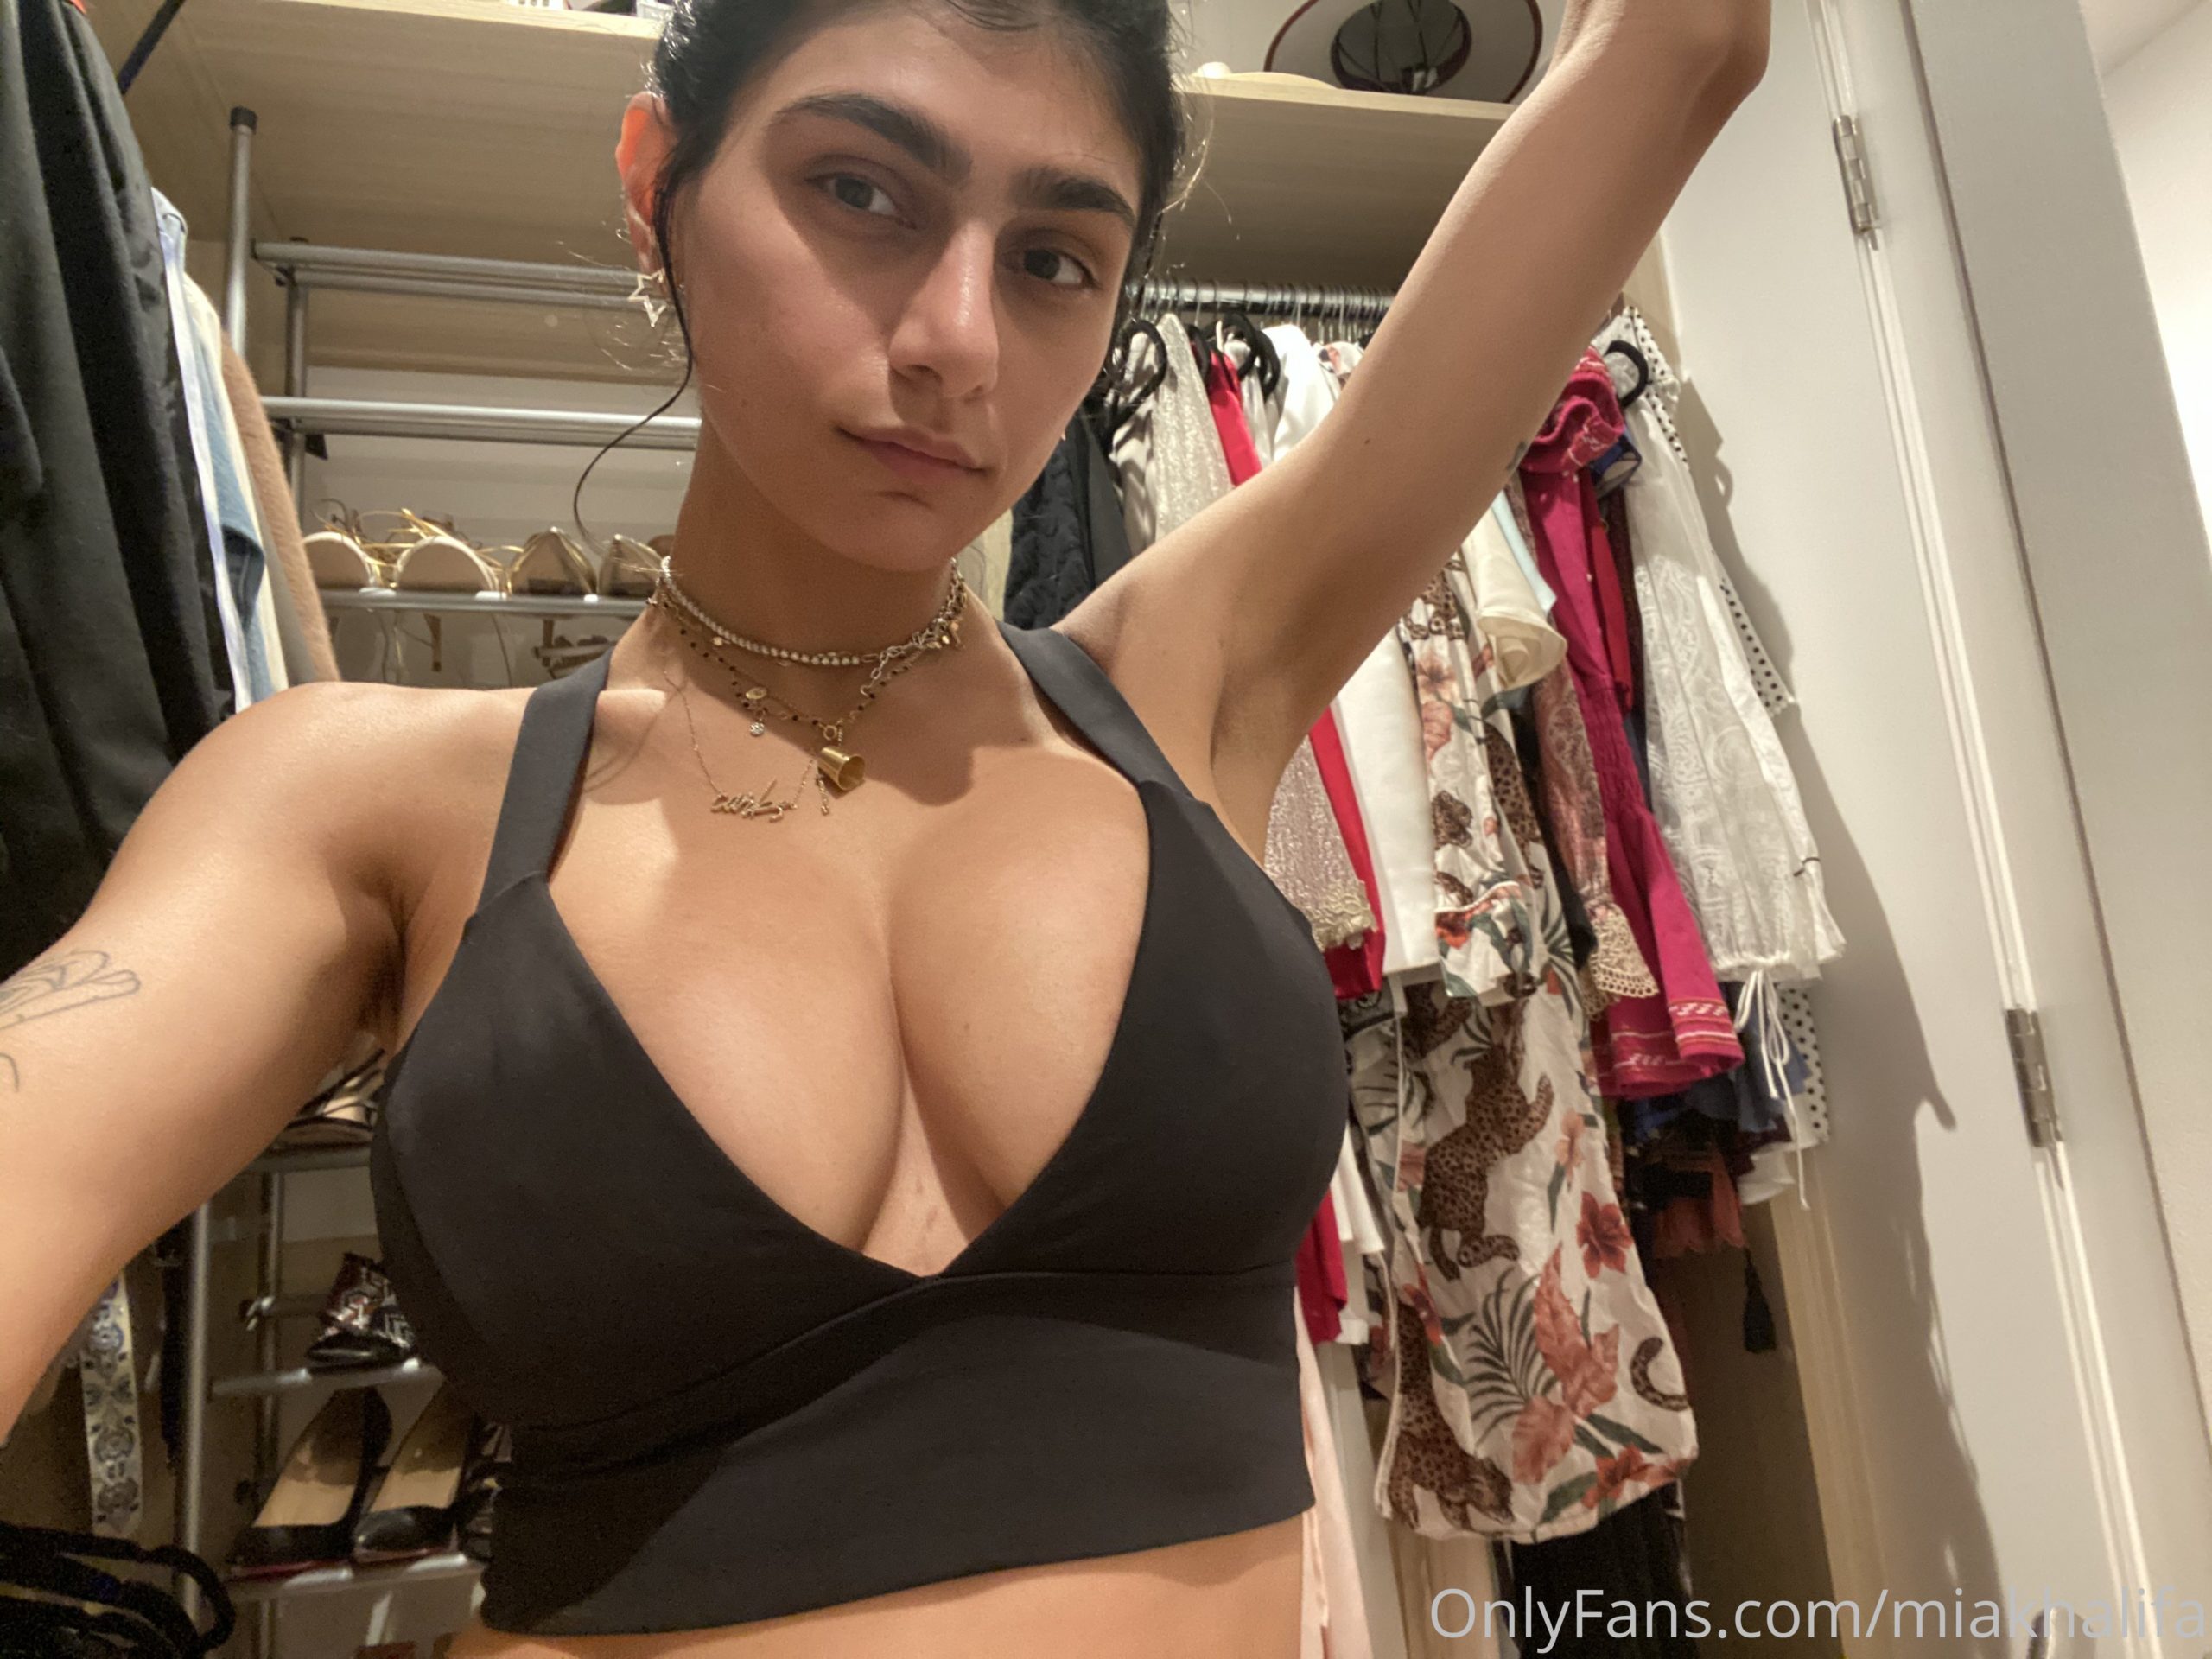 Private video Mia Khalifa Onlyfans Free